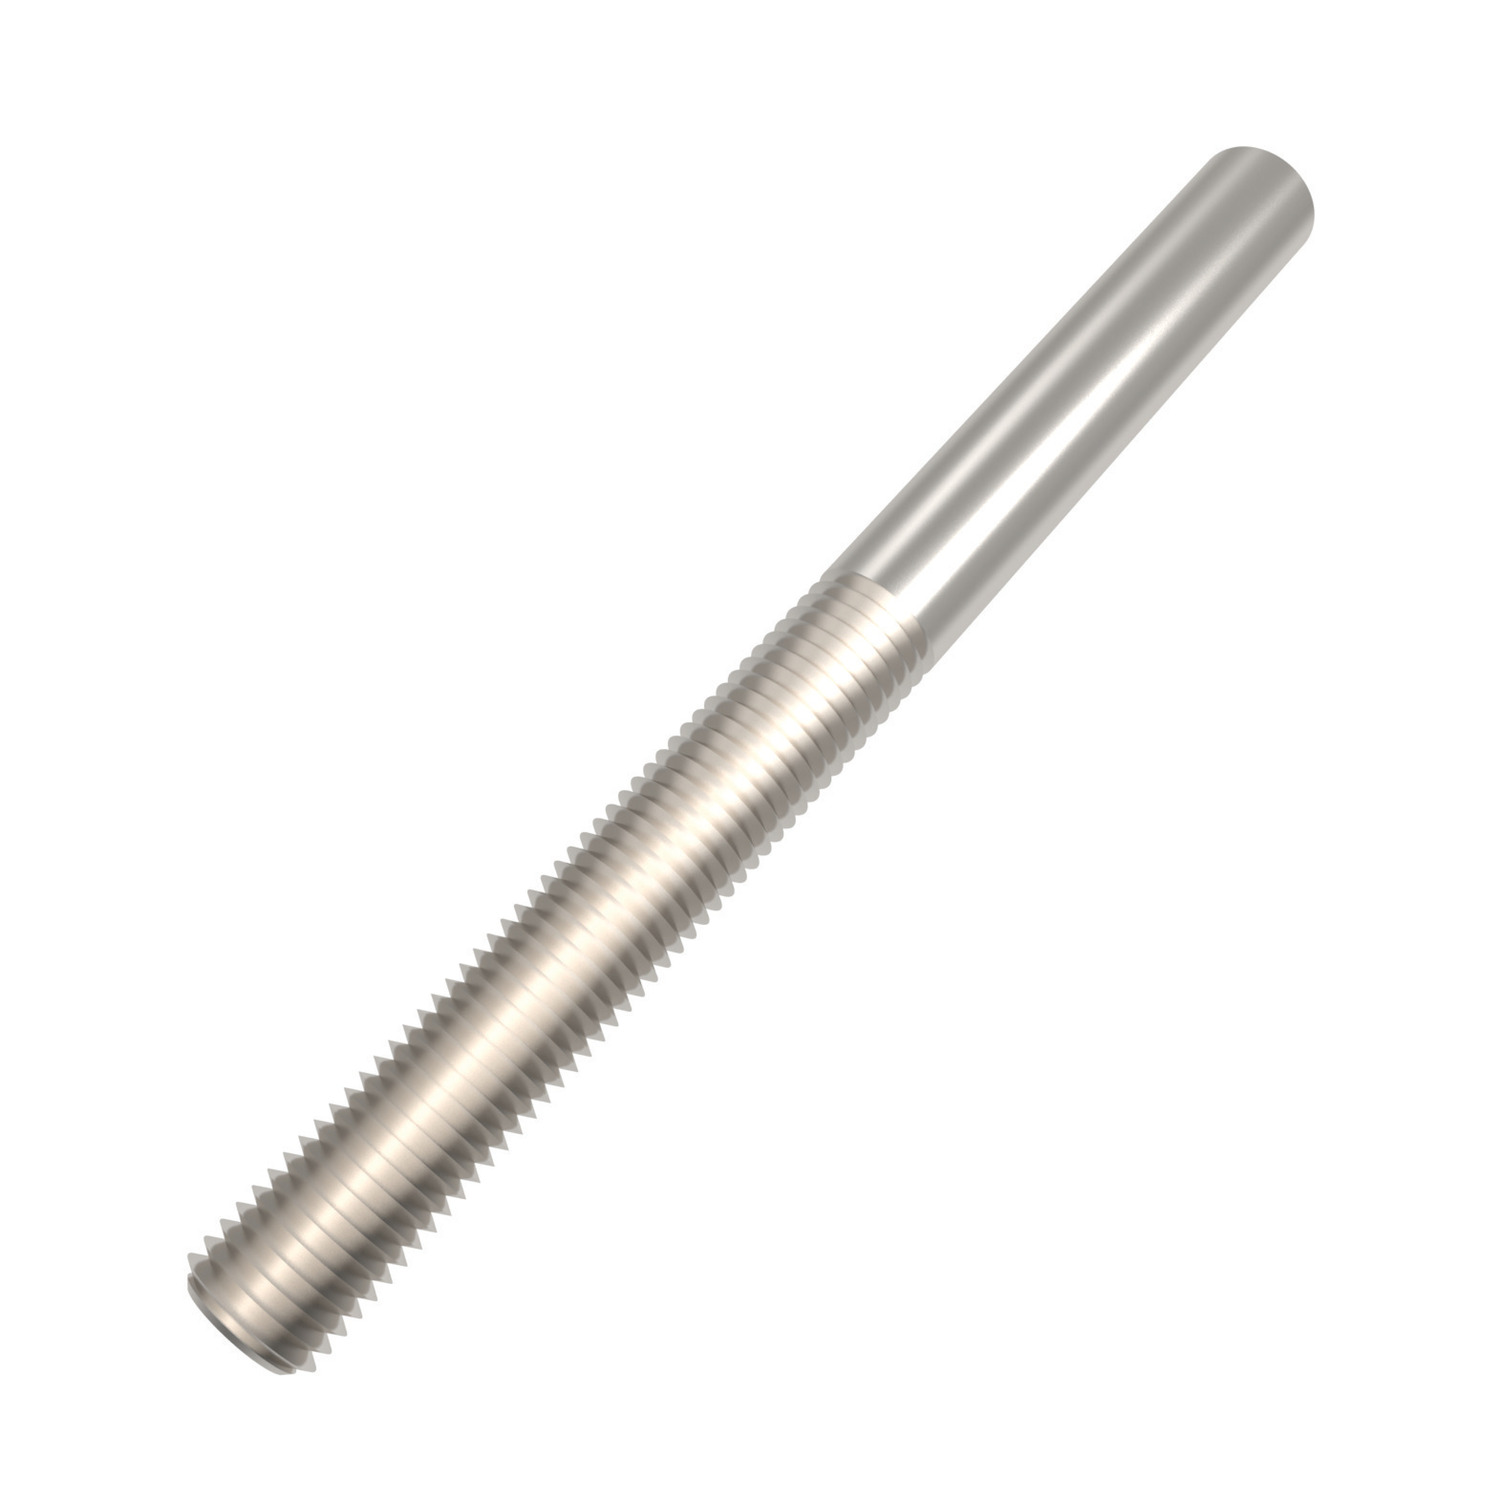 R3868.R010-A4 Welding Studs RH M10 A4 s/s Not to be used for lifting unless SWL marked.